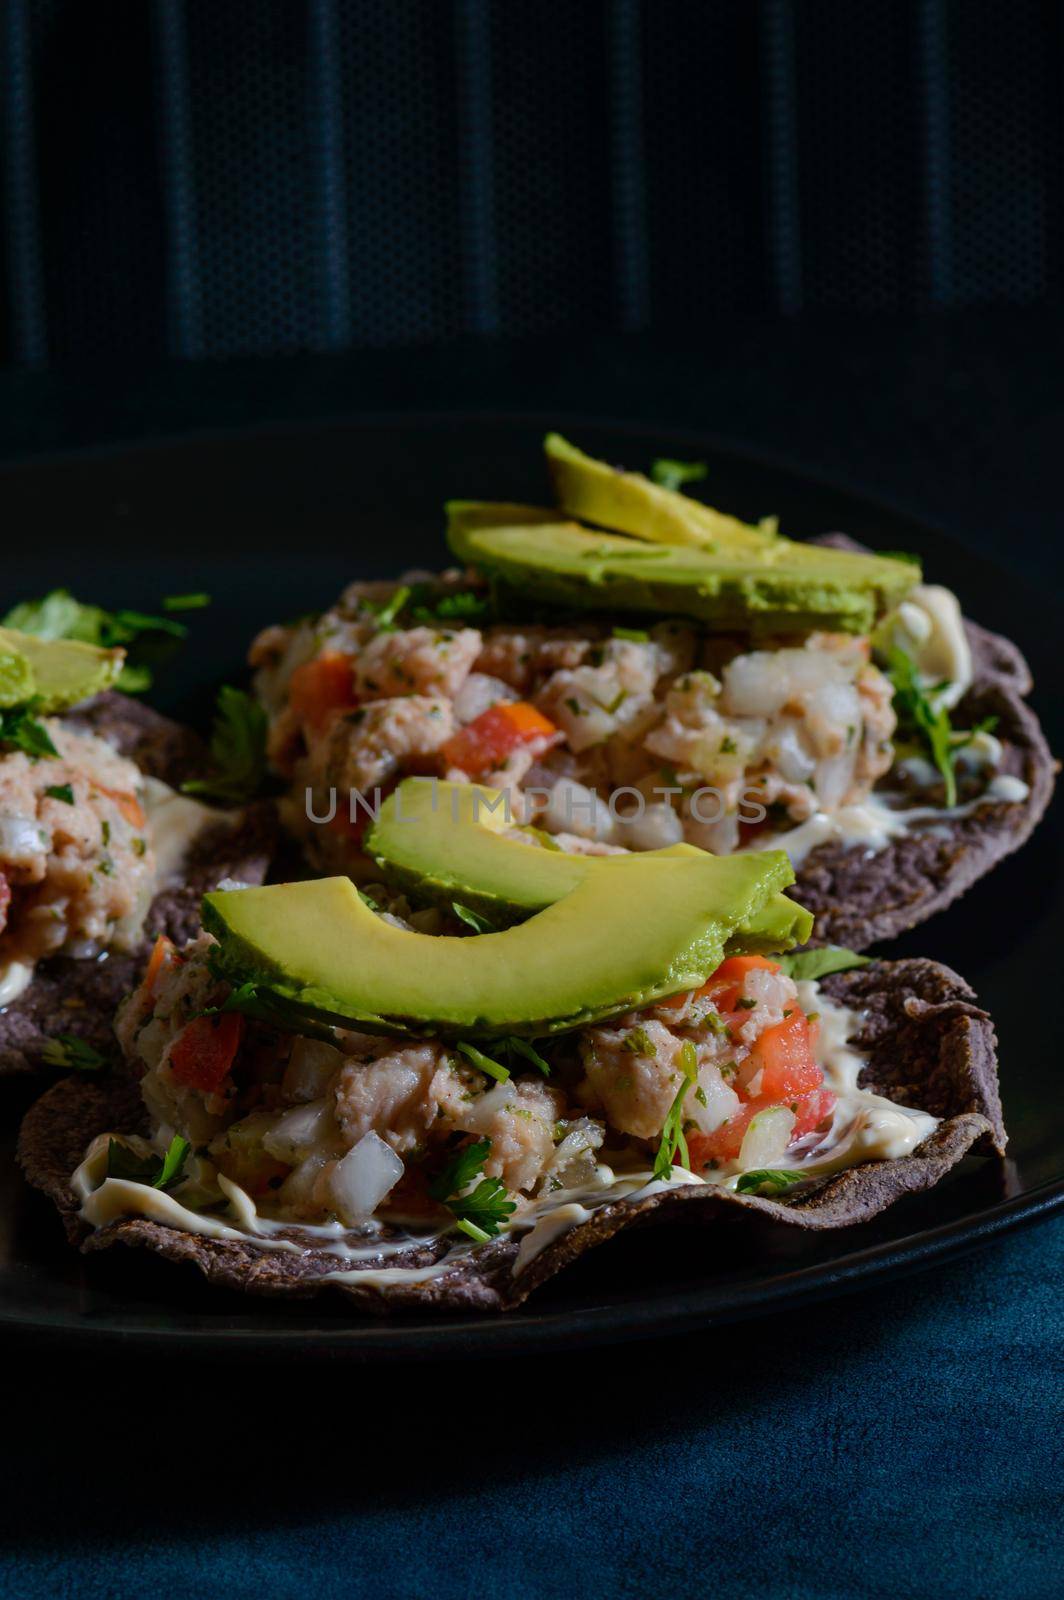 Fish Ceviche on Blue Corn Tostadas, Mexican Food by RobertPB